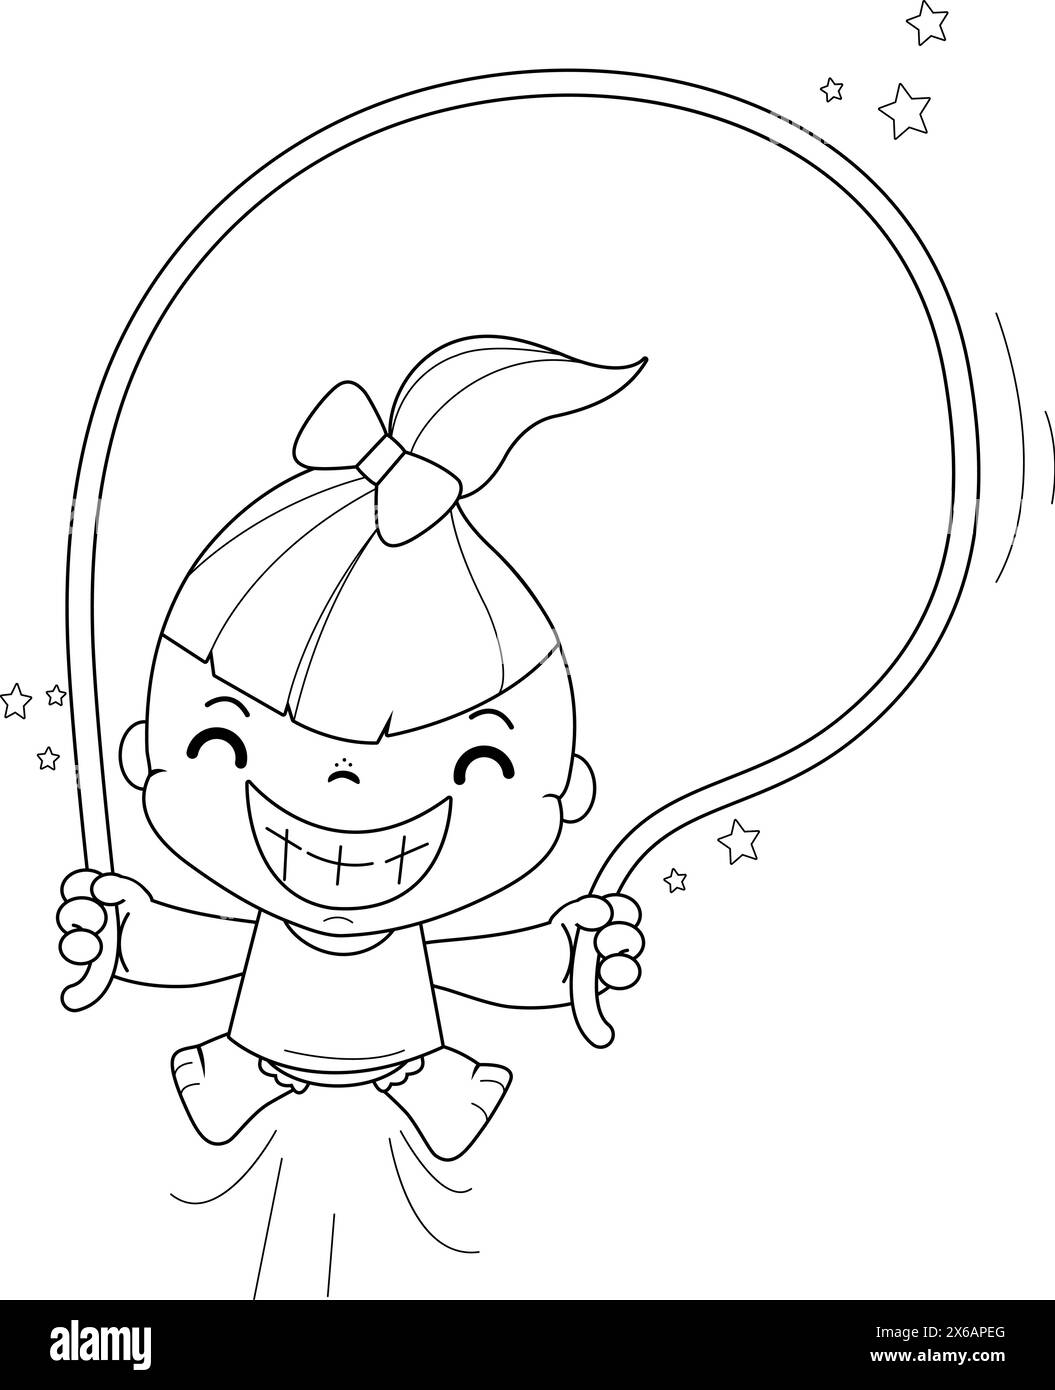 Girl playing, jumping rope. Child exercising and having fun. Vector black and white coloring page. Stock Vector